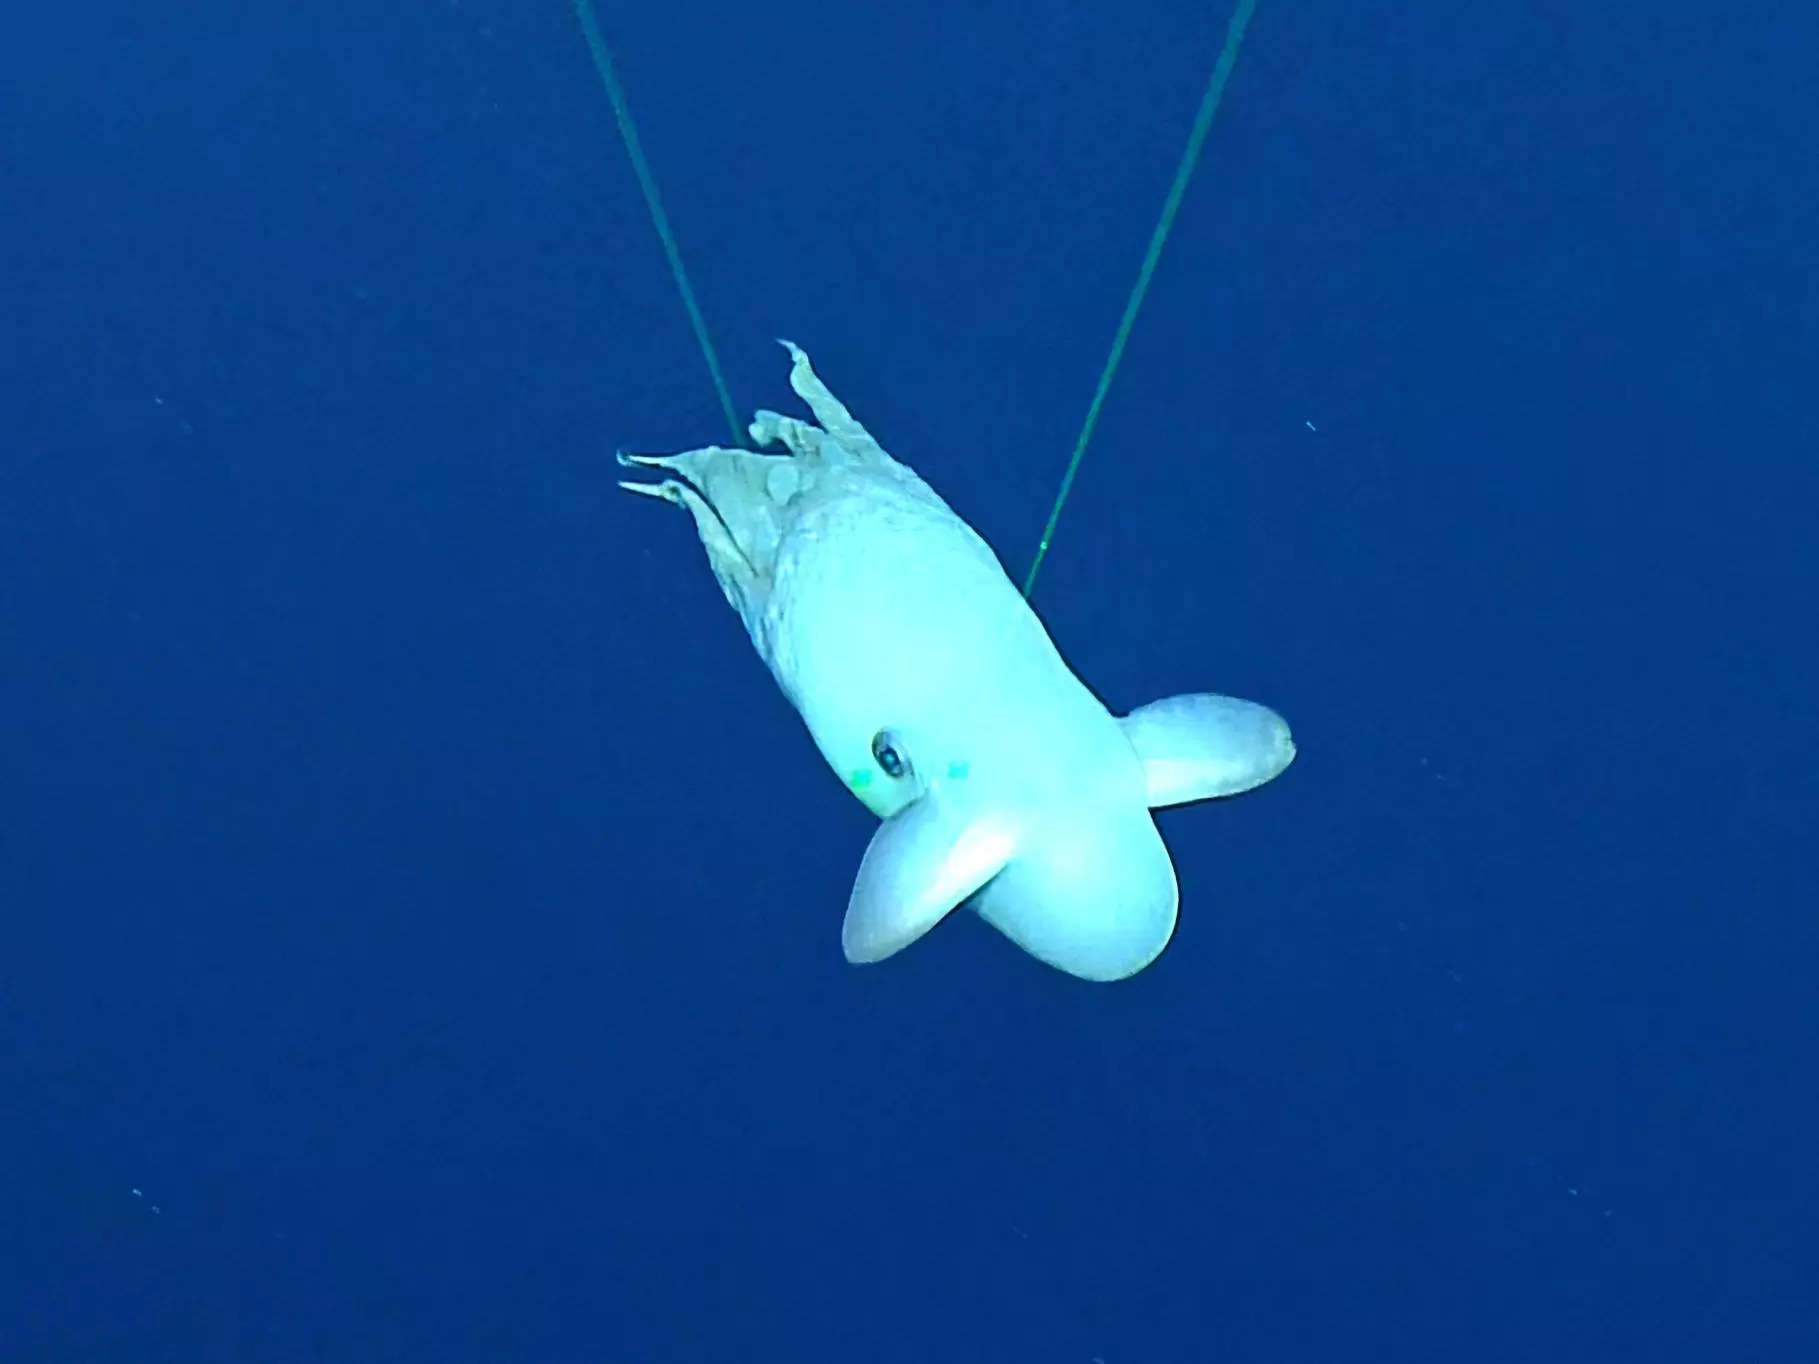 Video stills show the pale-white dumbo octopus set against a deep blue sea background. It